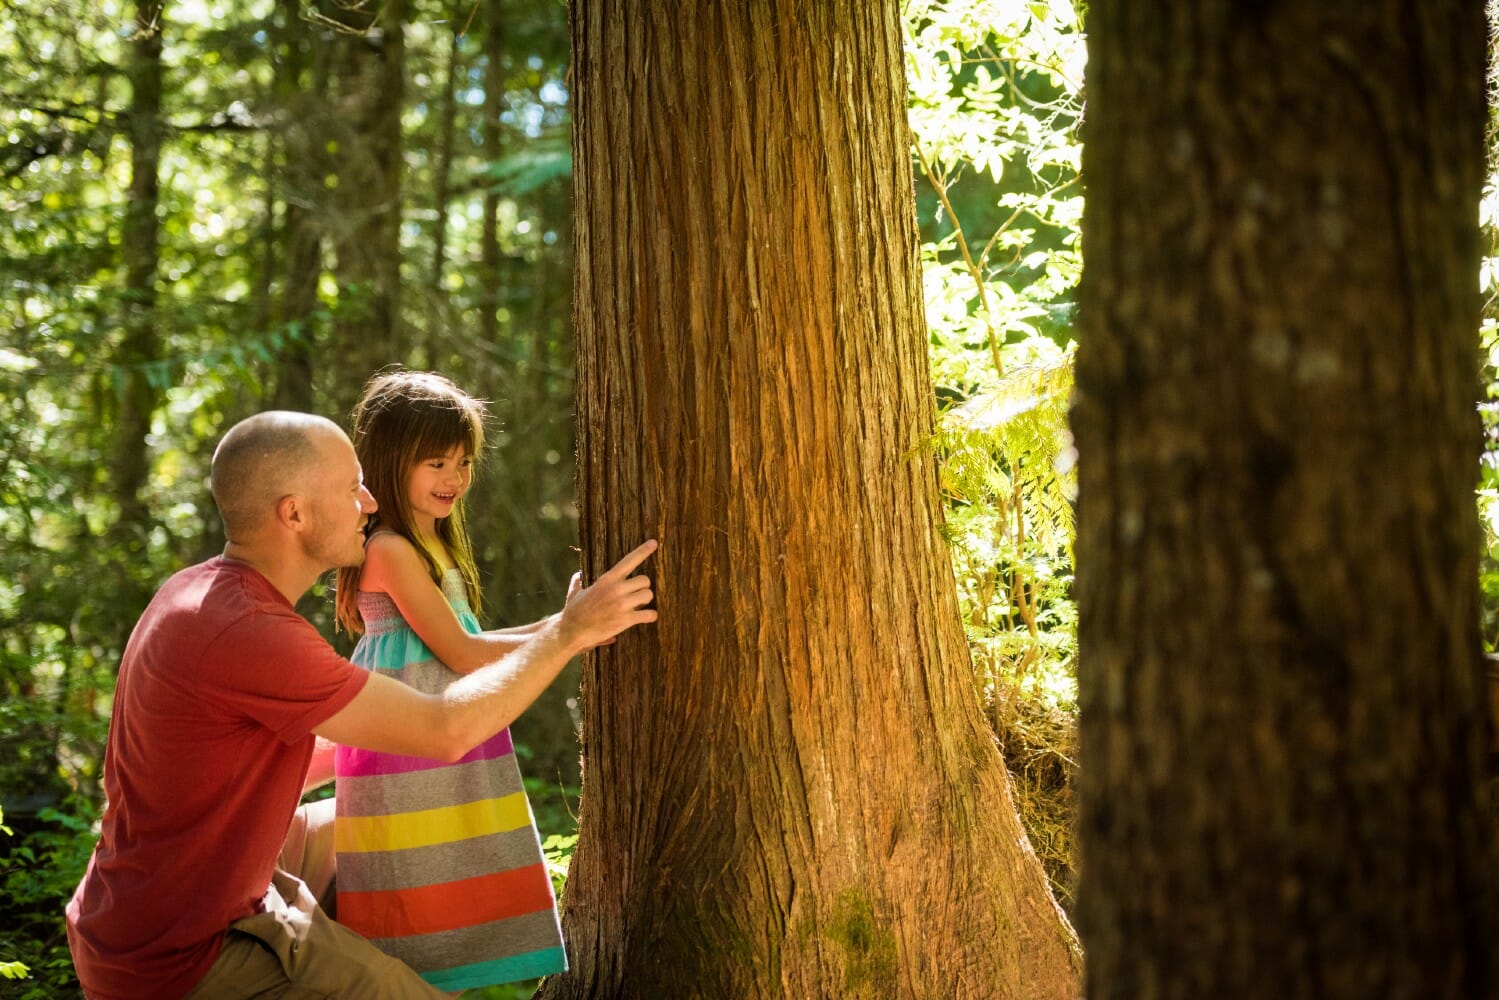 Exploring the trees in Cheakamus Community Forest image by Mike Crane